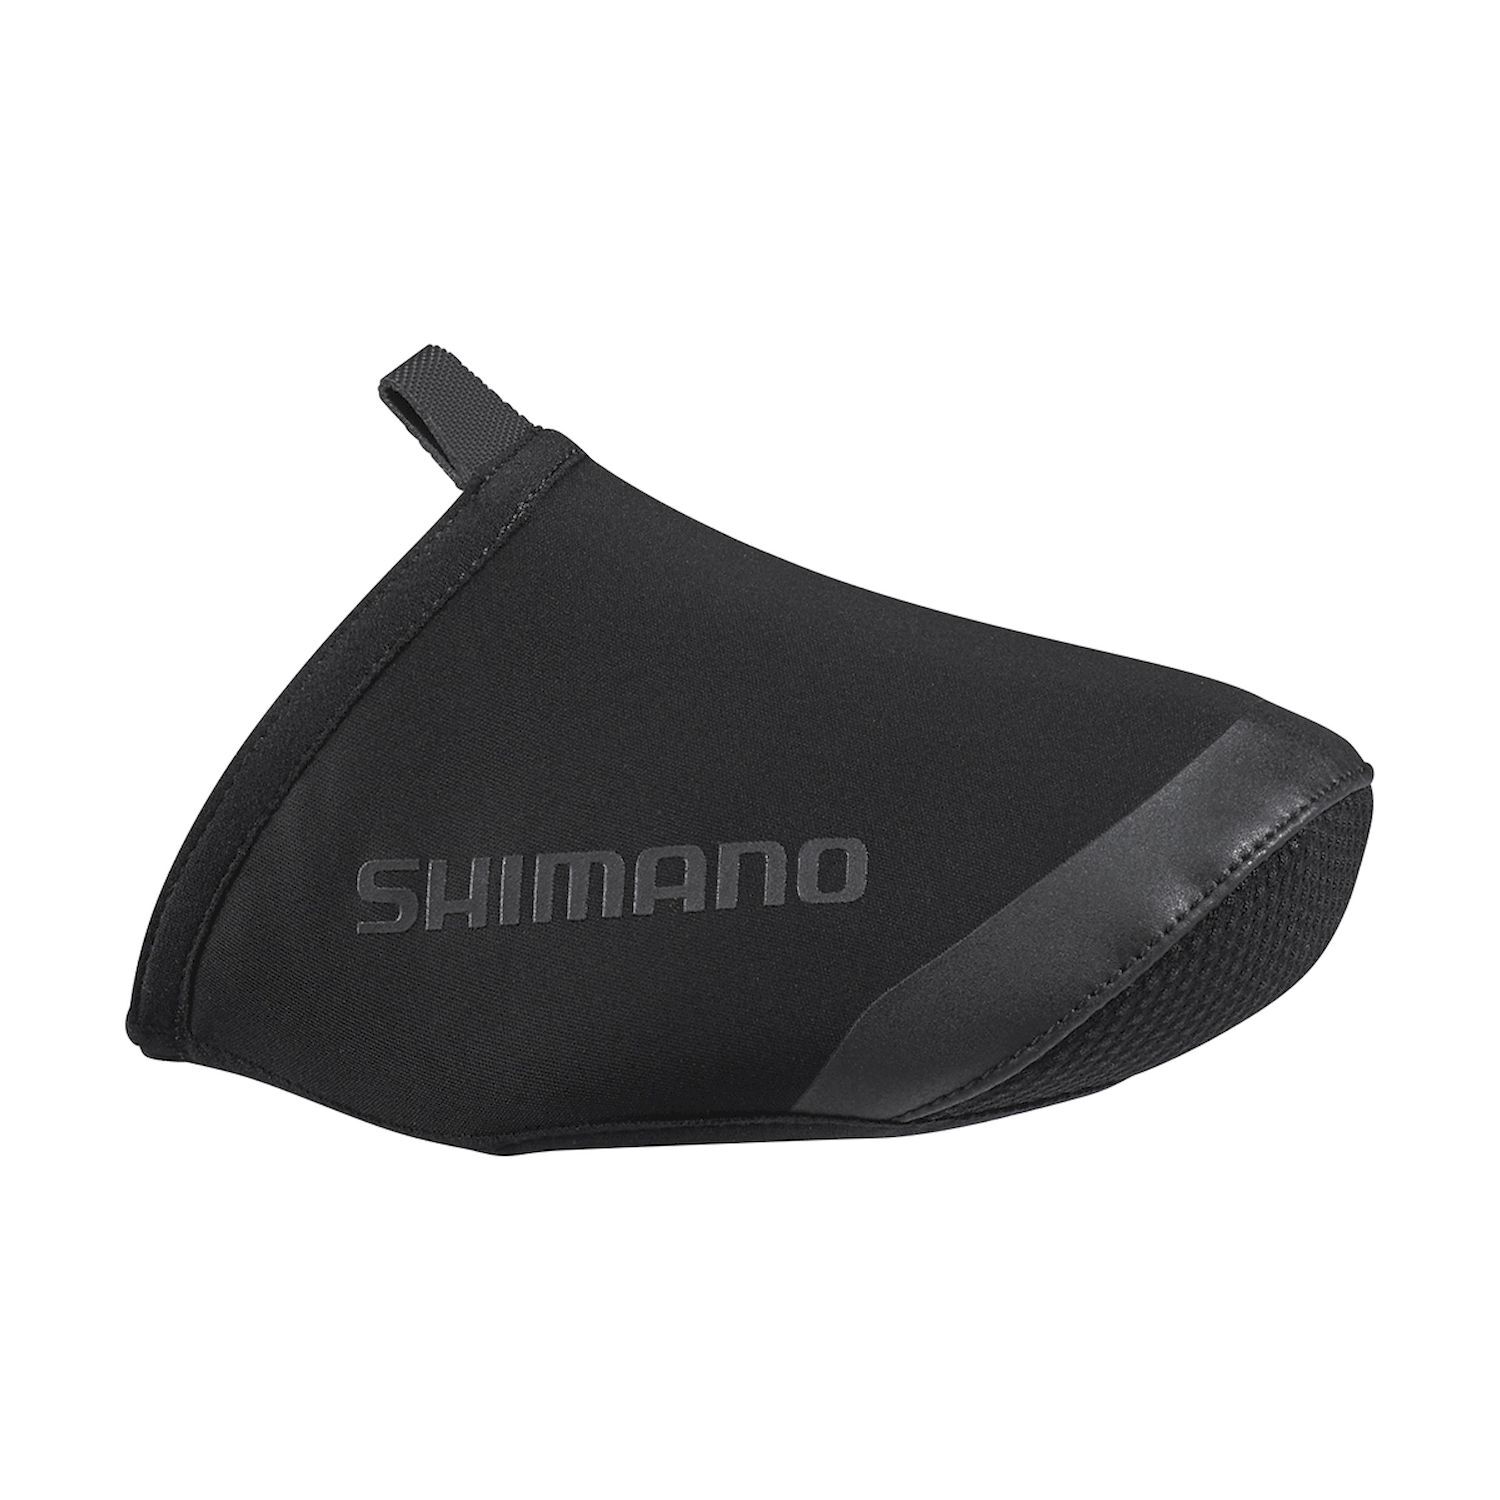 Shimano T1100R Softshell - Cycling overshoes